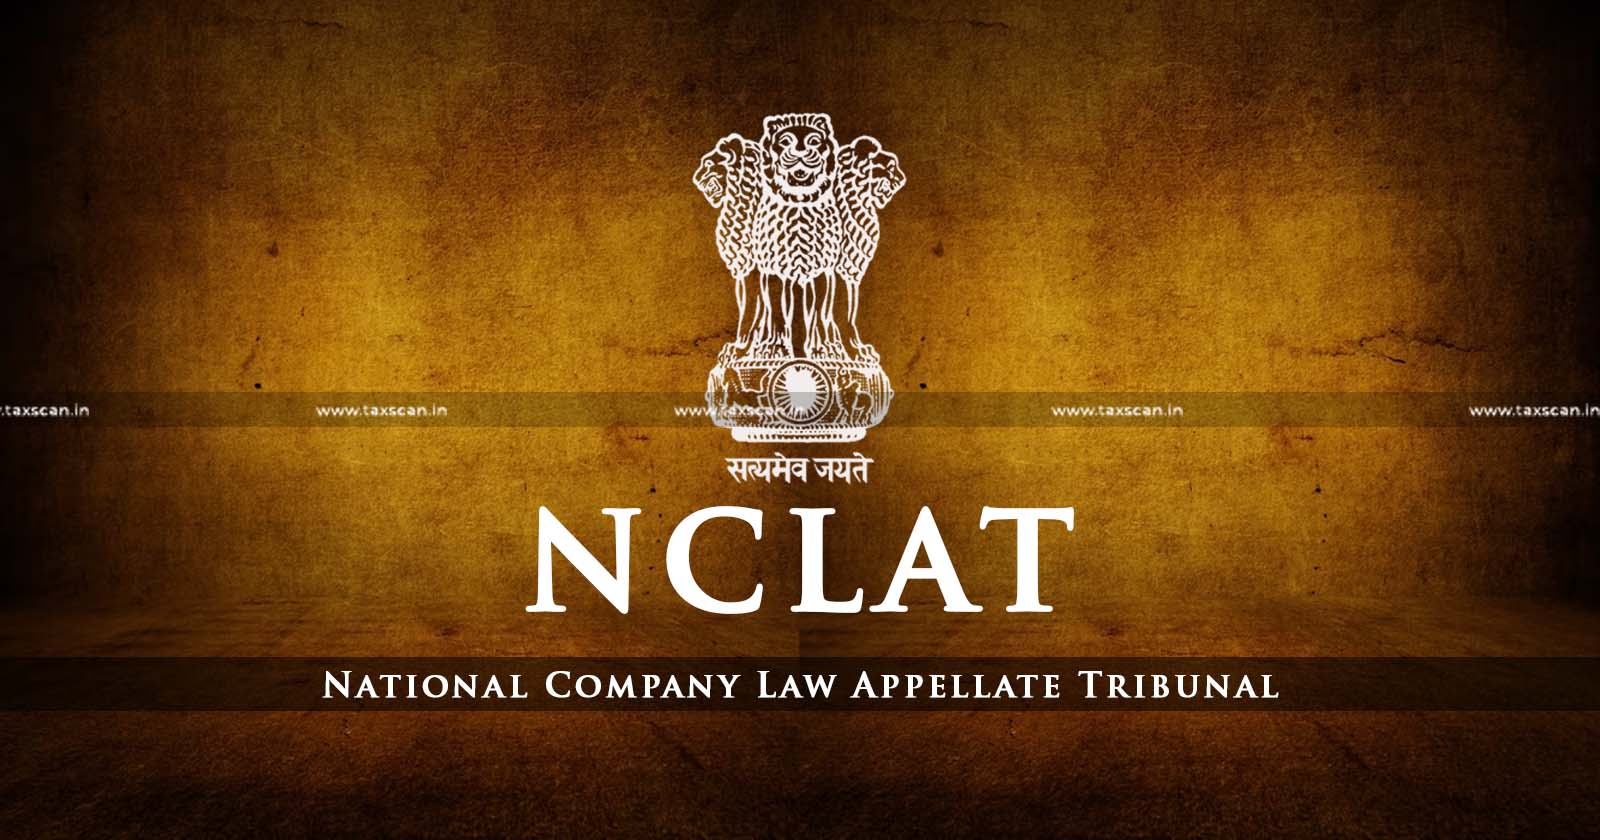 NCLAT directs to pay the Amount Deposited to the Court - Amount Deposited to the Court as per Consent Term to Financial Creditor - NCLAT - Amount Deposited - Court - Financial Creditor - Taxscan